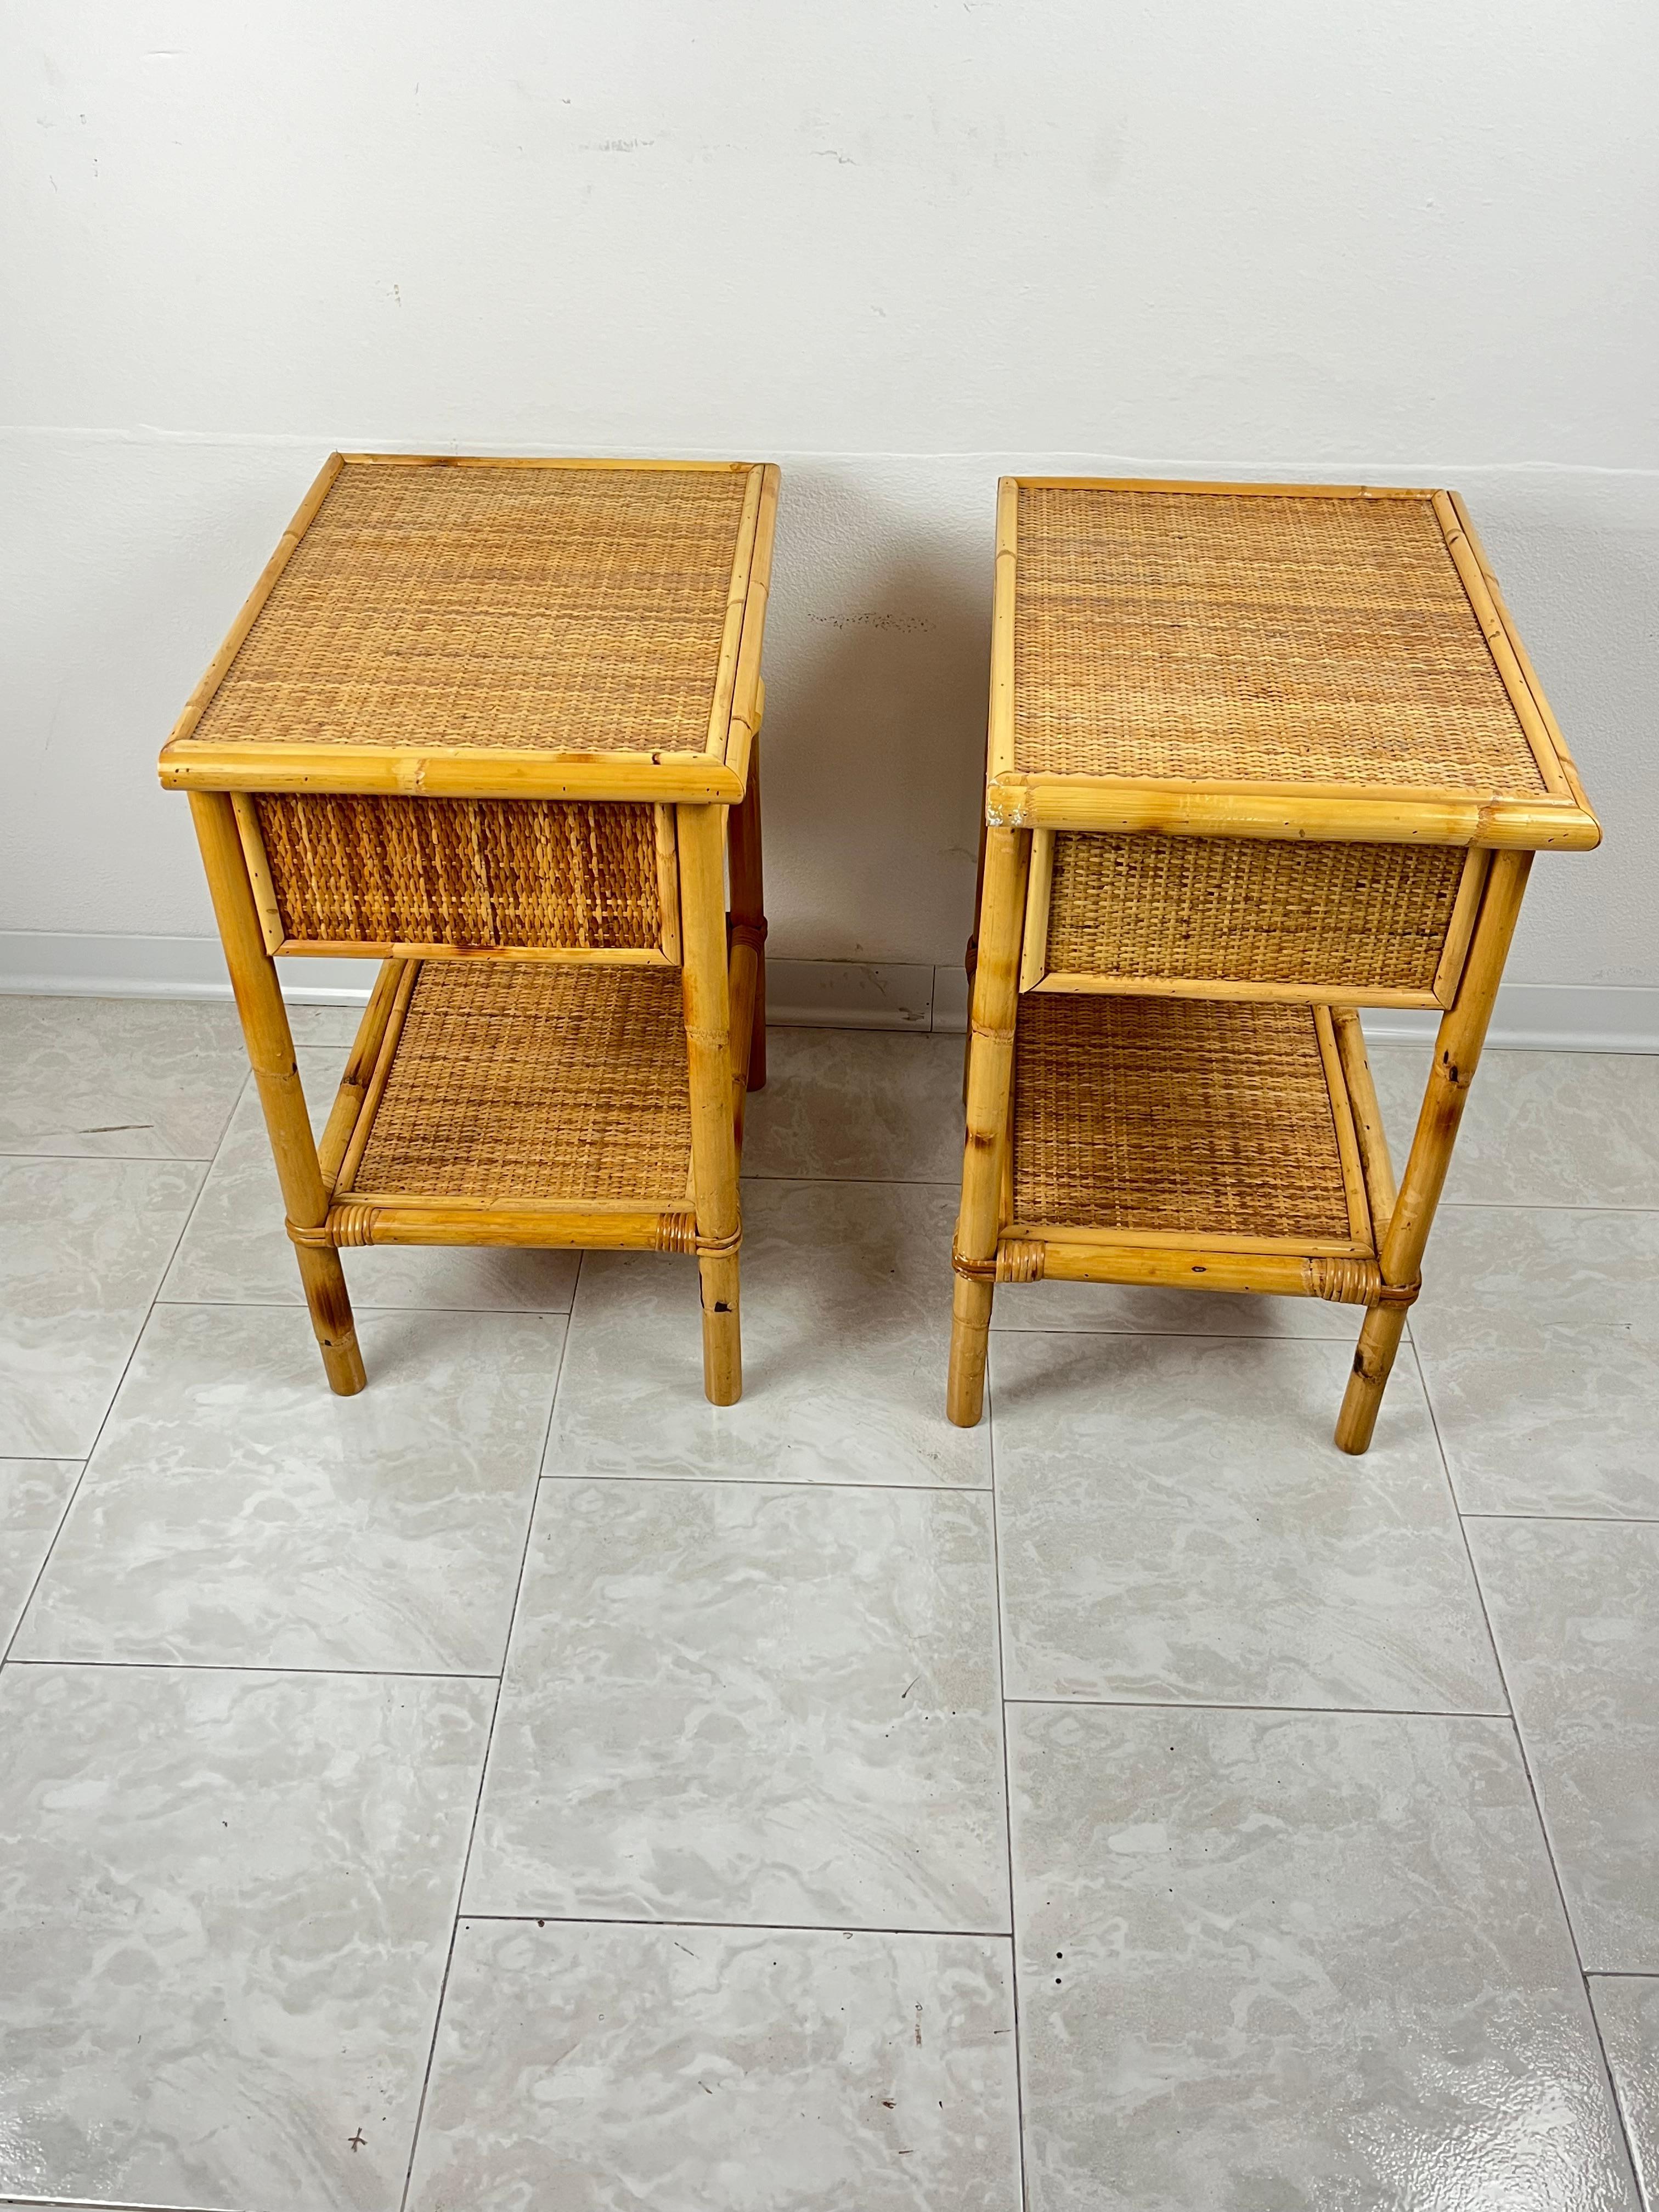 Italian Set of 2 Mid-Century French Riviera Wicker And Rattan Bedside Tables 1960s For Sale